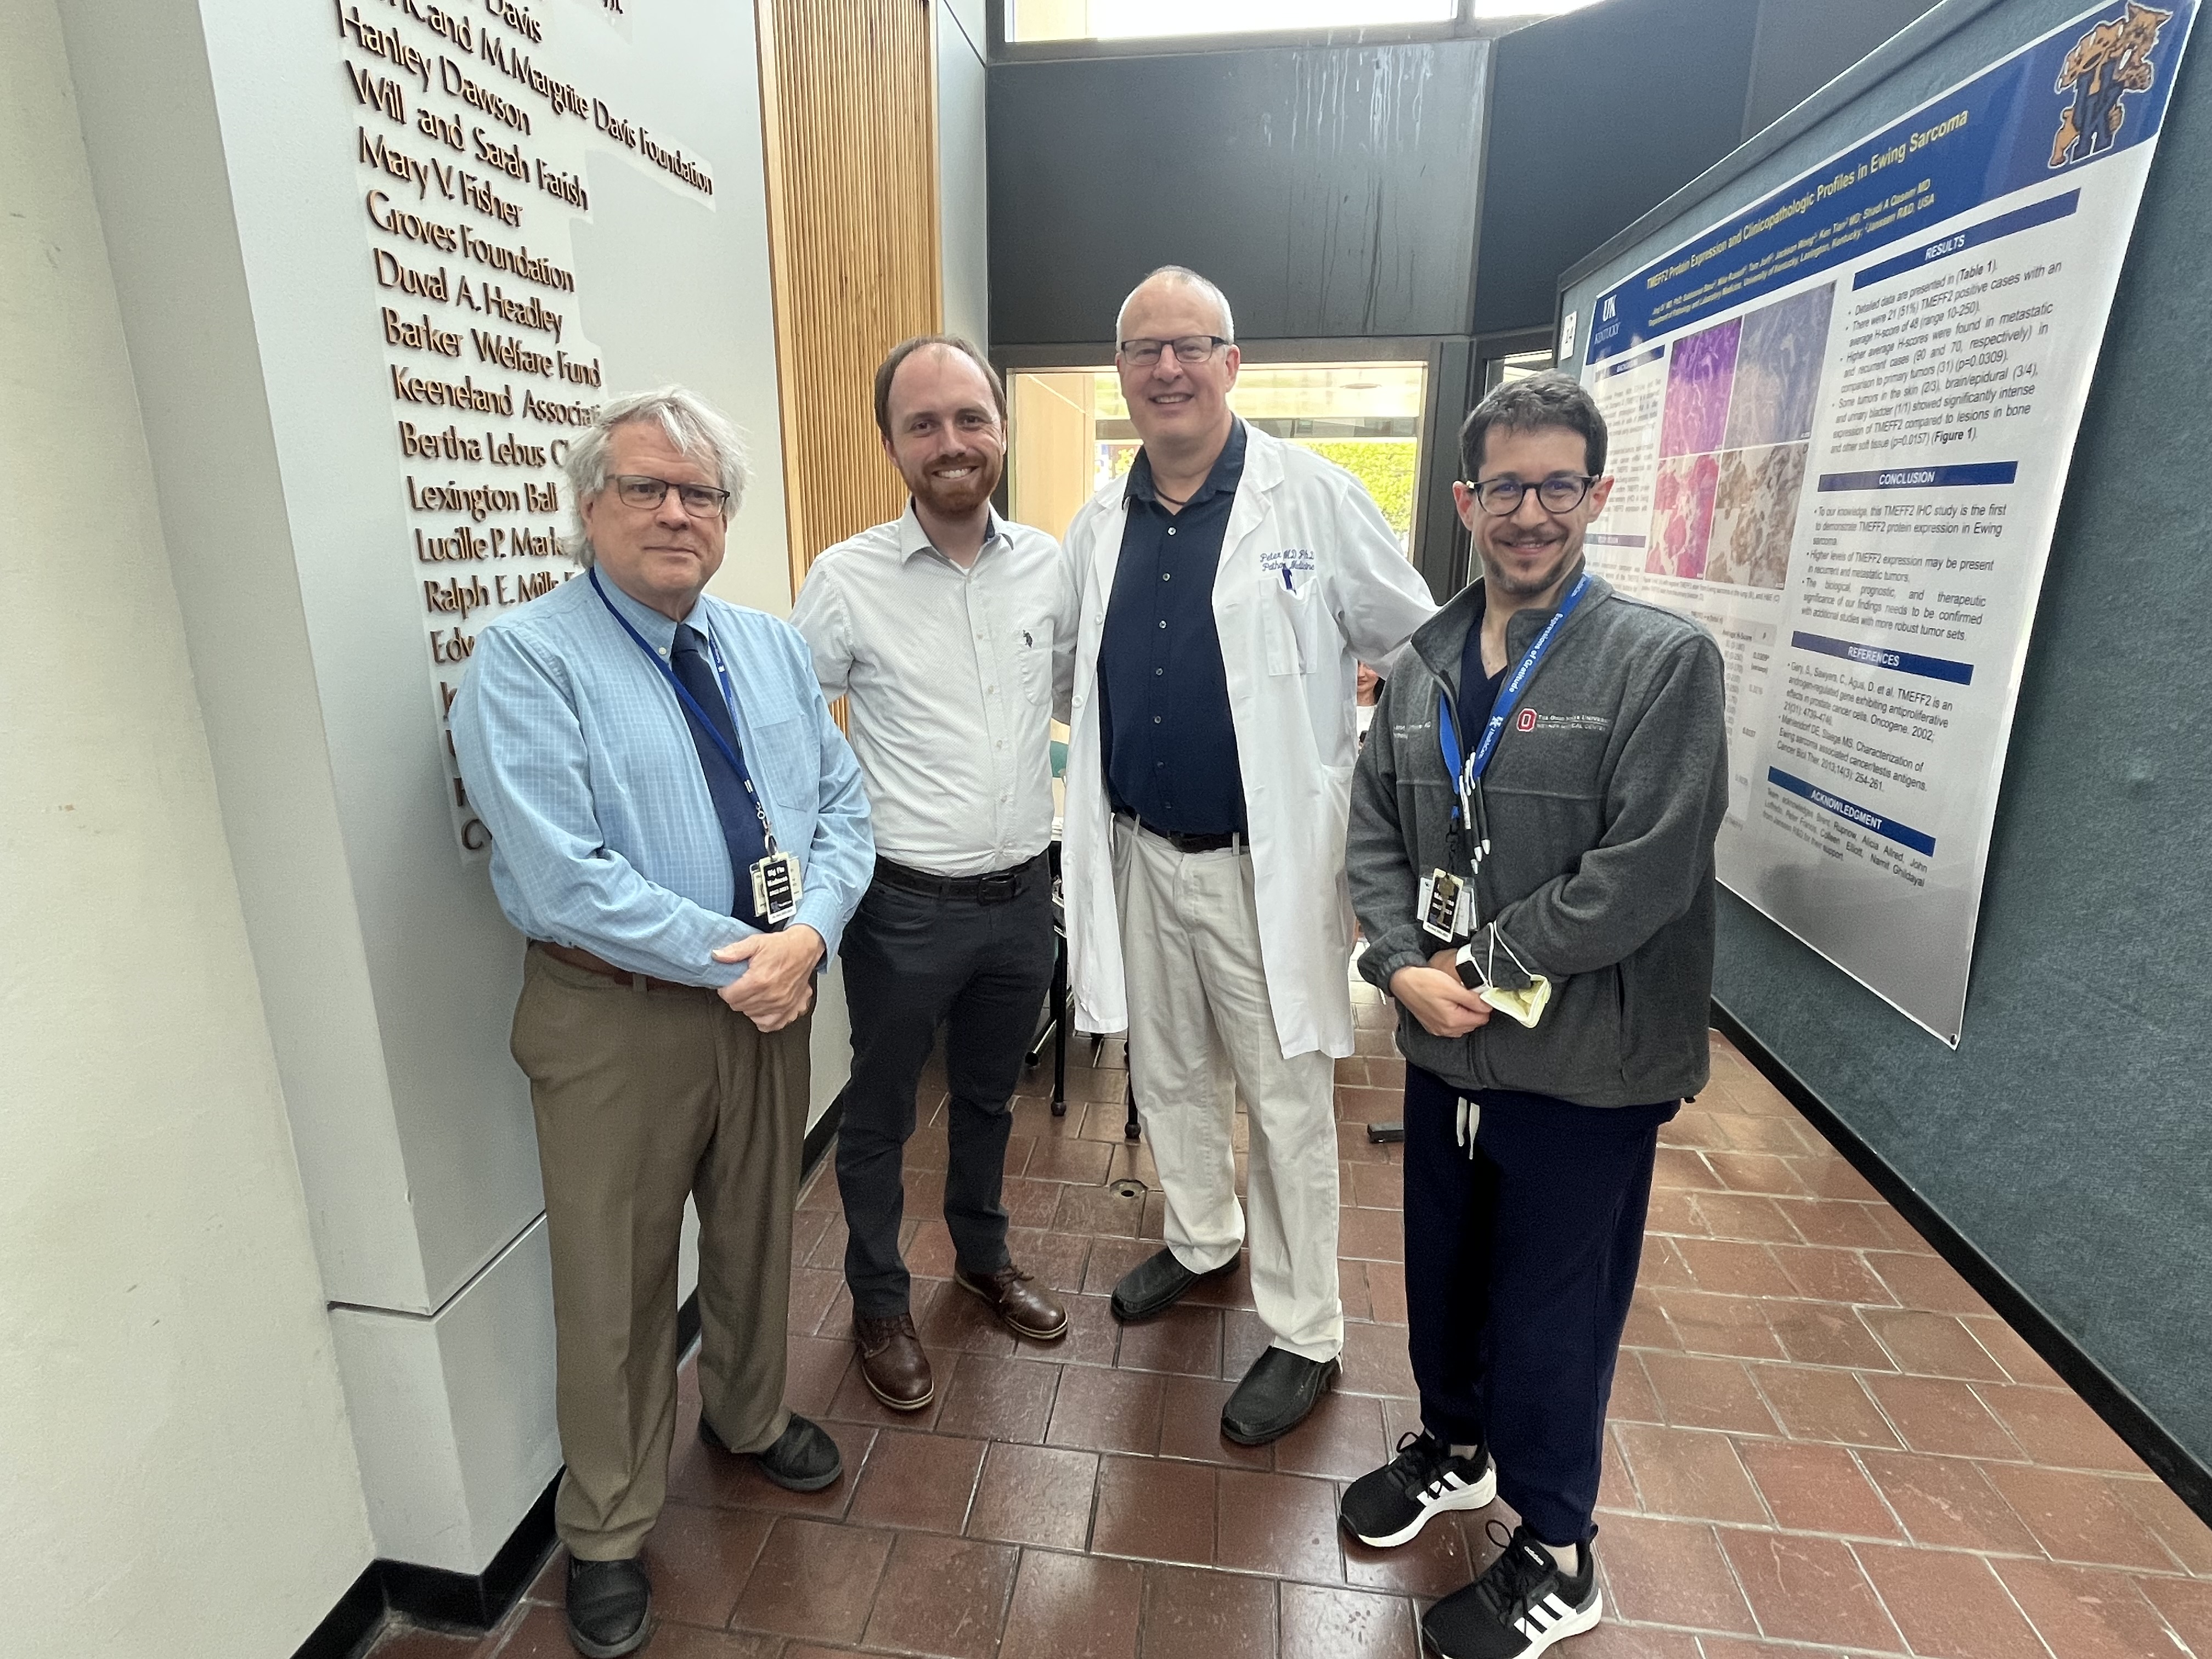 Chester Jennings, MD, Justin Miller, PhD, Pete Nelson, MD, and Aaron Shmookler, MD at Research Day.